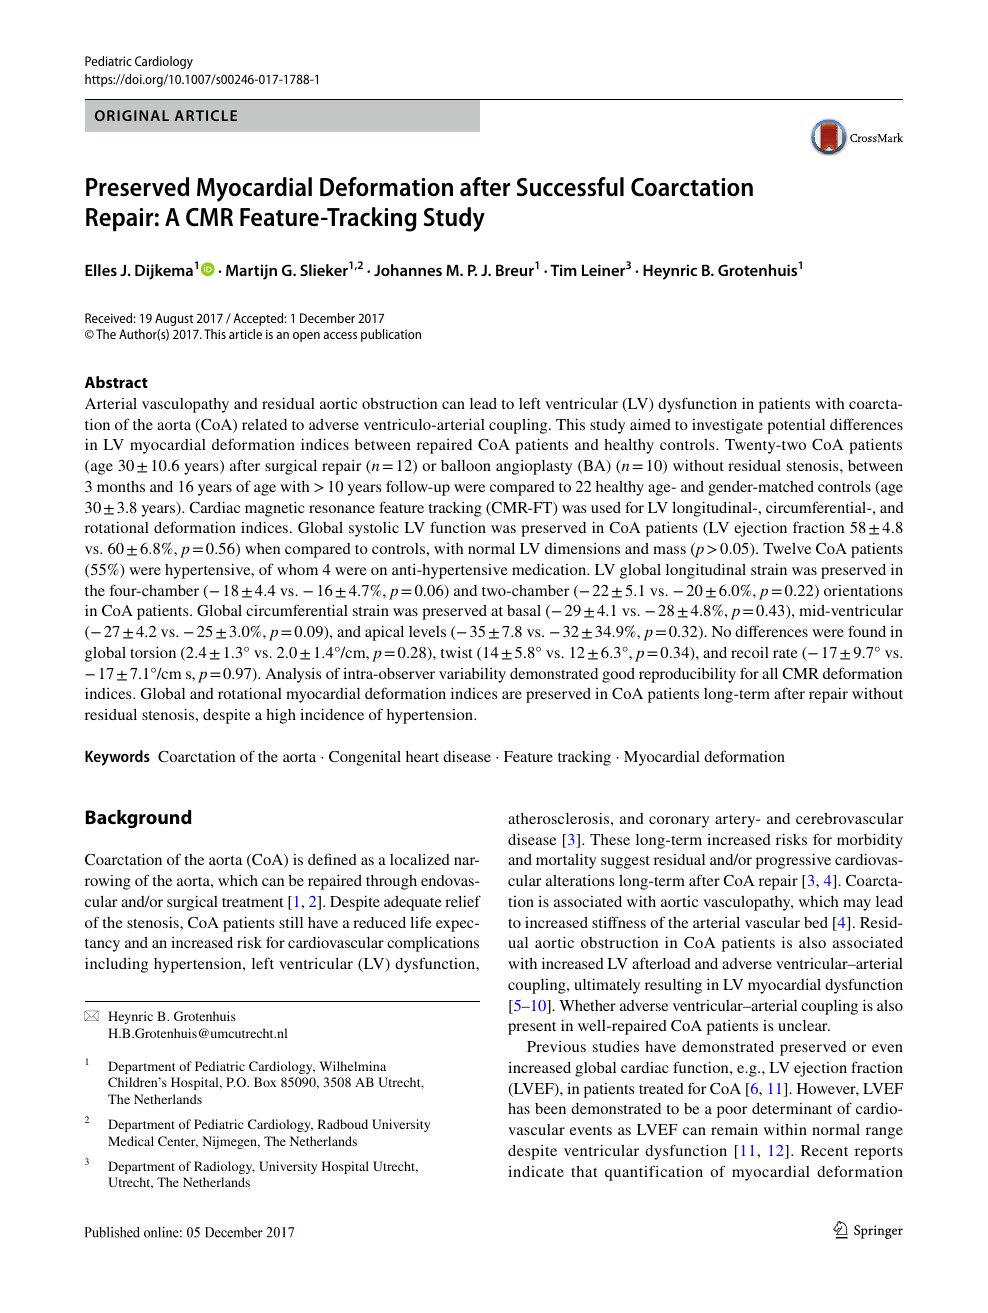 Preserved Myocardial Deformation After Successful Coarctation Repair A Cmr Feature Tracking Study Topic Of Research Paper In Clinical Medicine Download Scholarly Article Pdf And Read For Free On Cyberleninka Open Science Hub